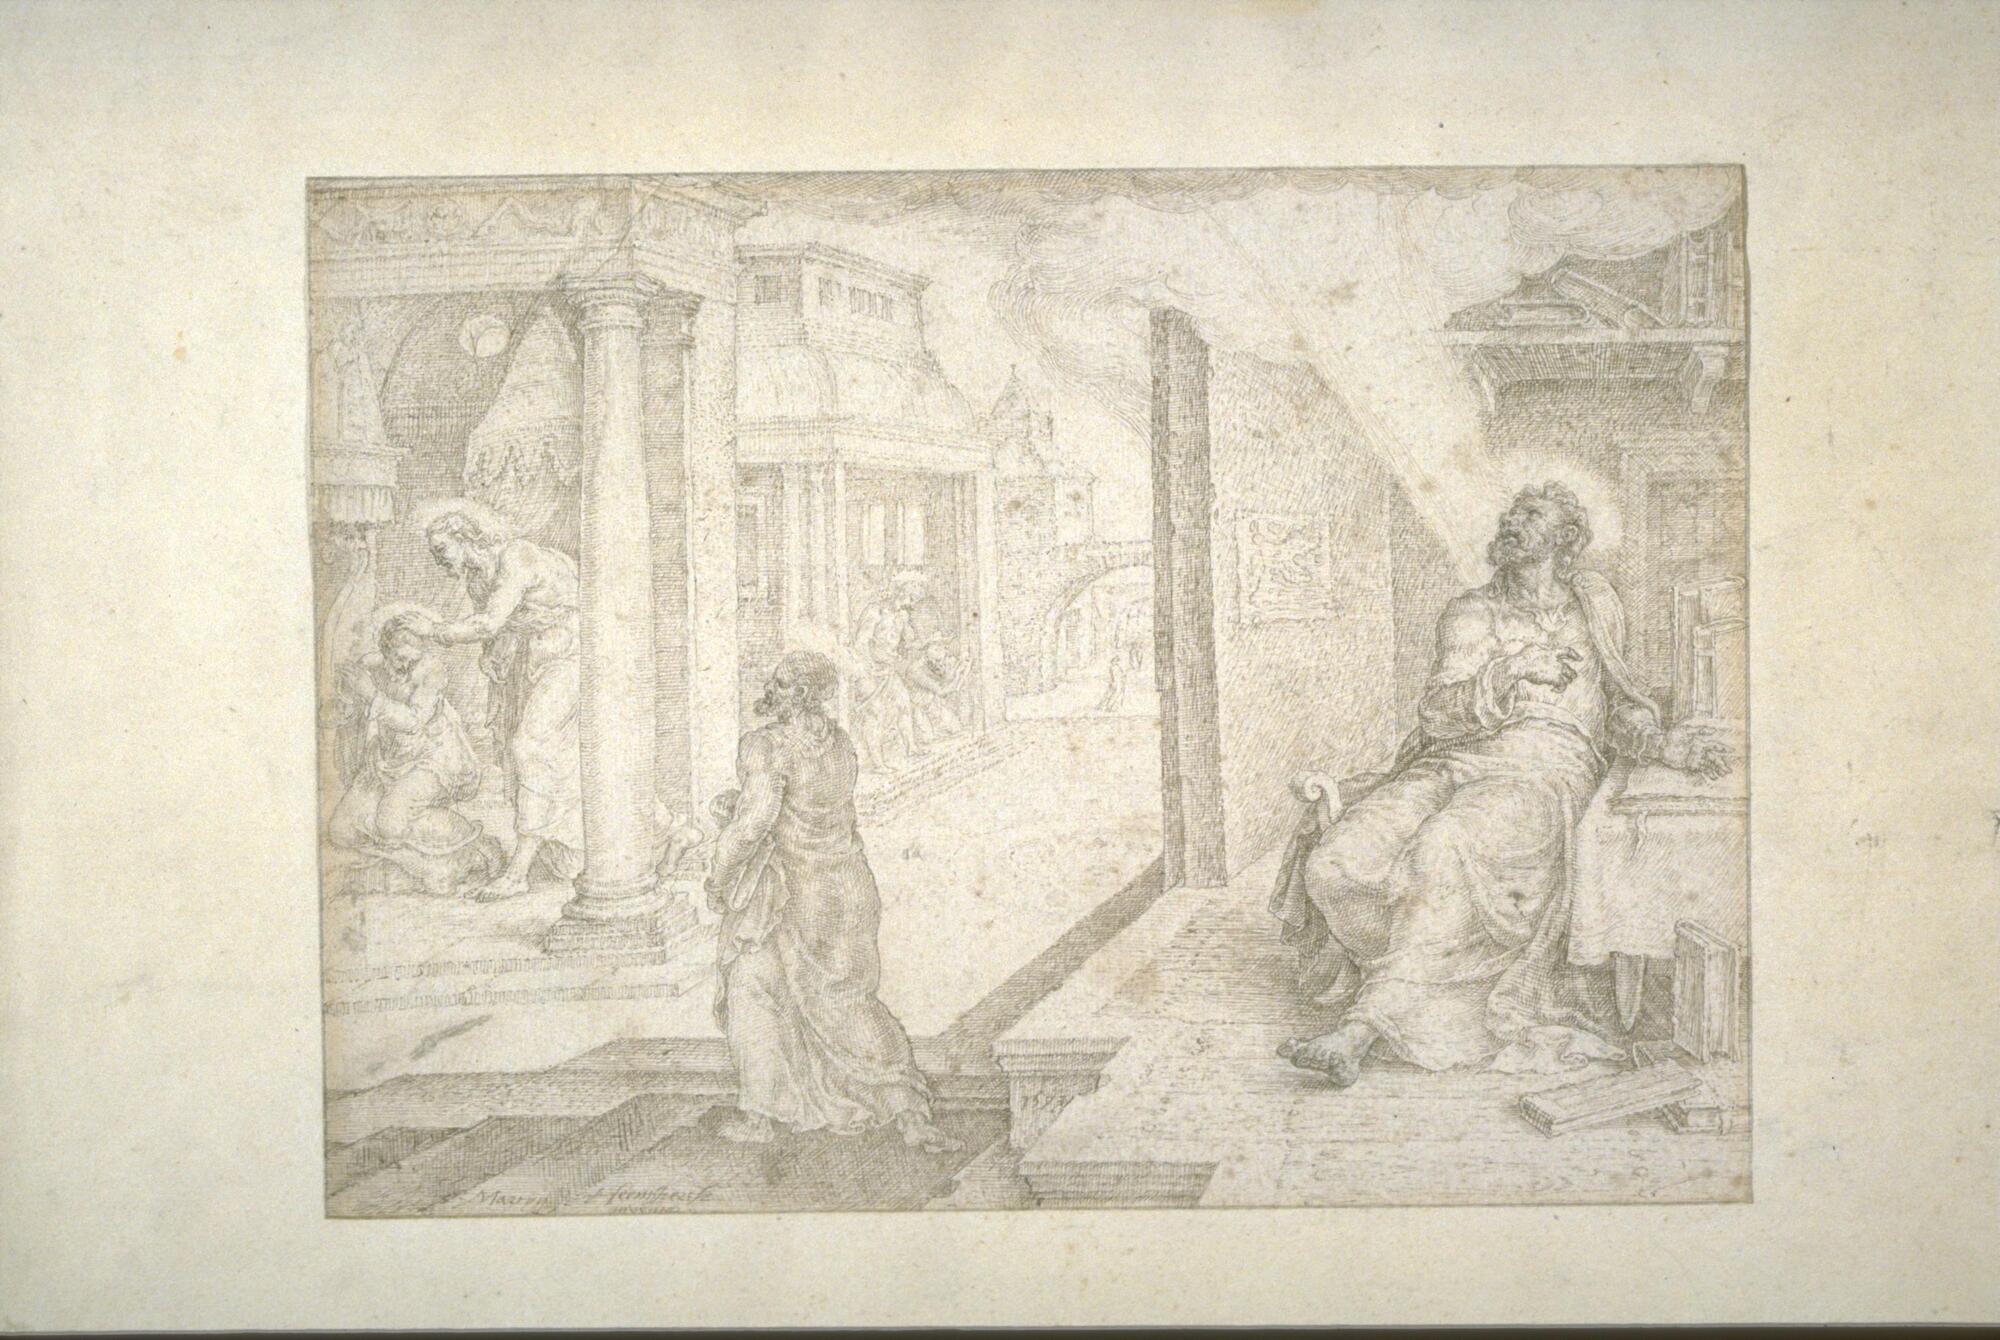 A series of architectural spaces unfold, each showing figures engaged in some activity. At right, the largest figure is shown seated looking upwards towards a light source. The same figure, somewhat smaller, walks from right to left towards a small architectural space at the left where the same figure lays a hand on the head of a kneeling woman. Other scenes continue into the distance.